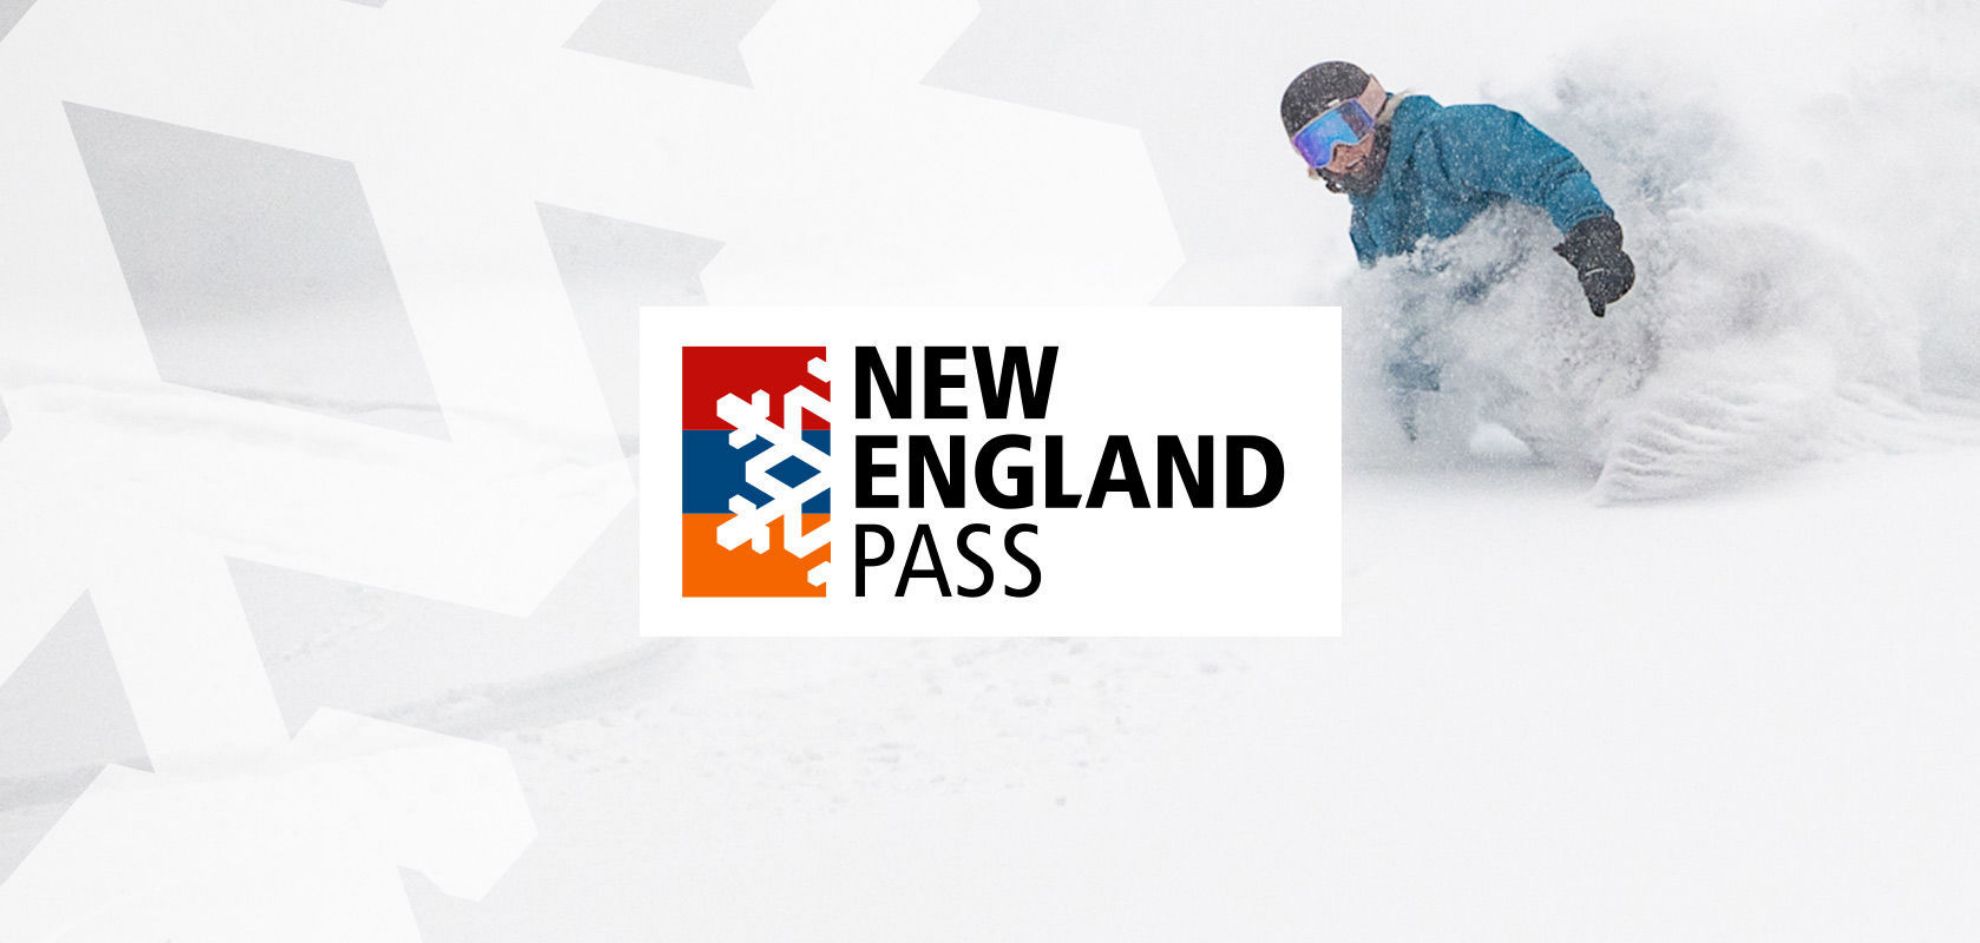 Snowboarder in powder; New England Pass graphic logo over image